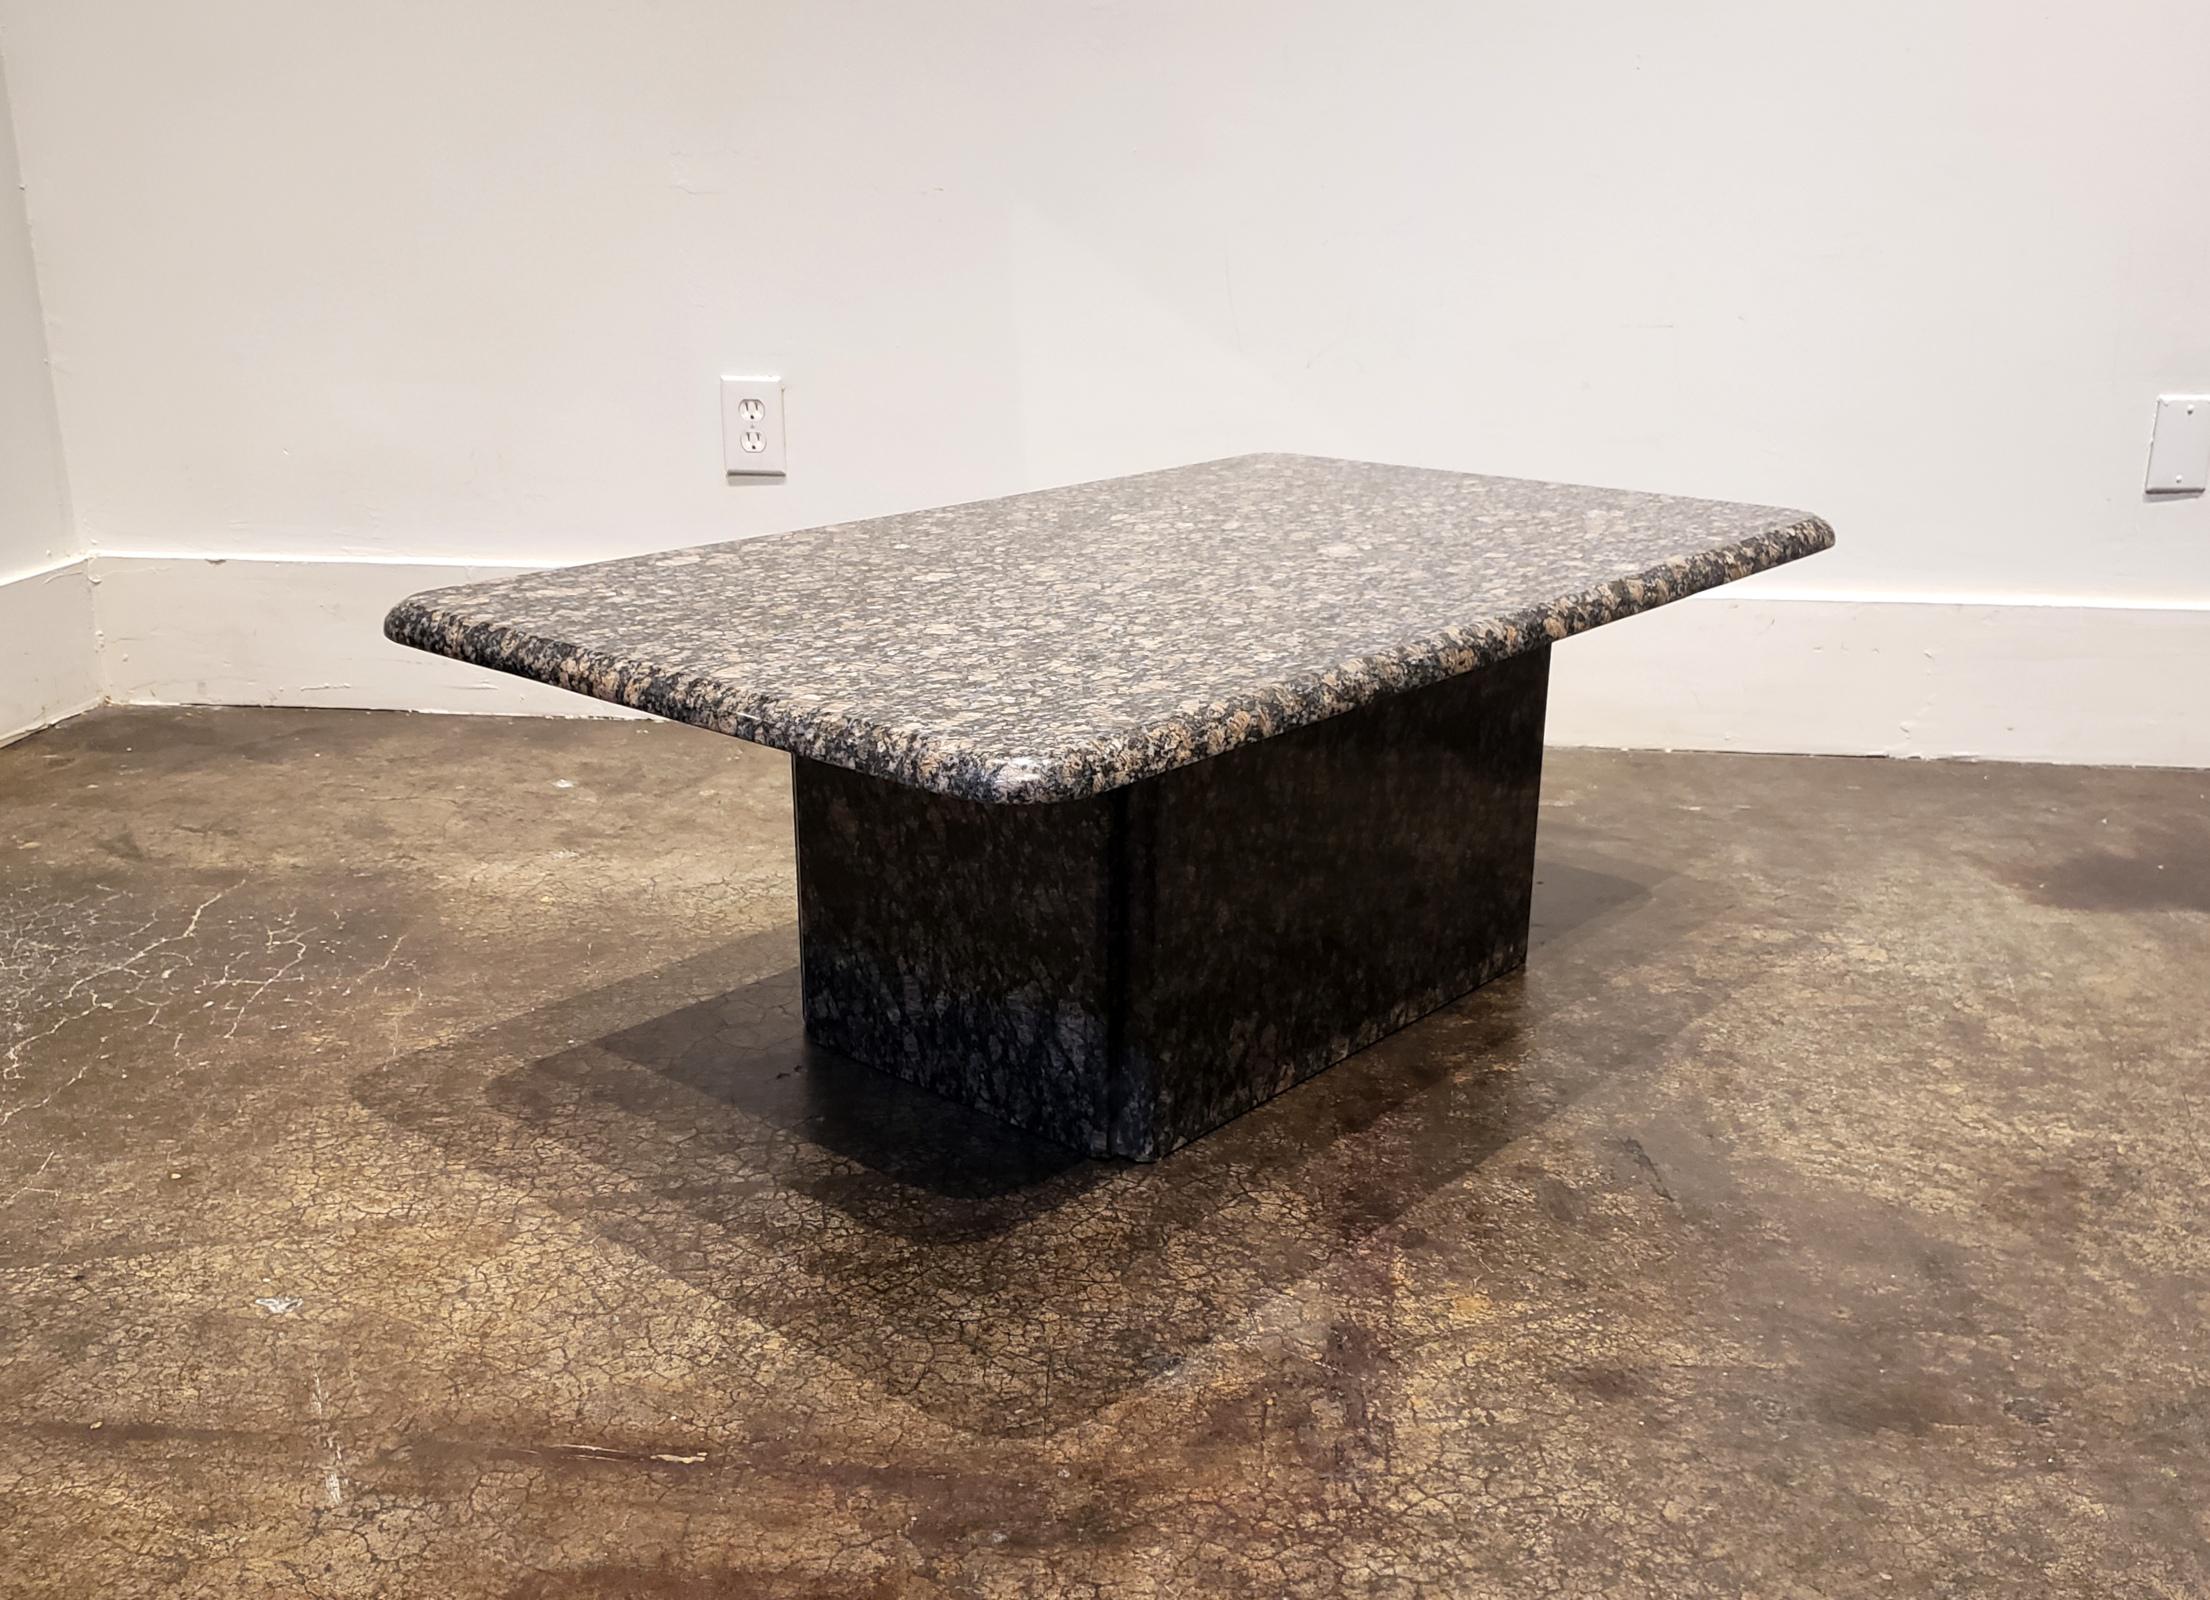 1980s Italian Baltic granite coffee table. Beautiful large specs of tan, grey, brown, black and white. Beveled, rounded-edge rectangular top. In excellent condition with very minor signs of wear.

Measures: Table is 28